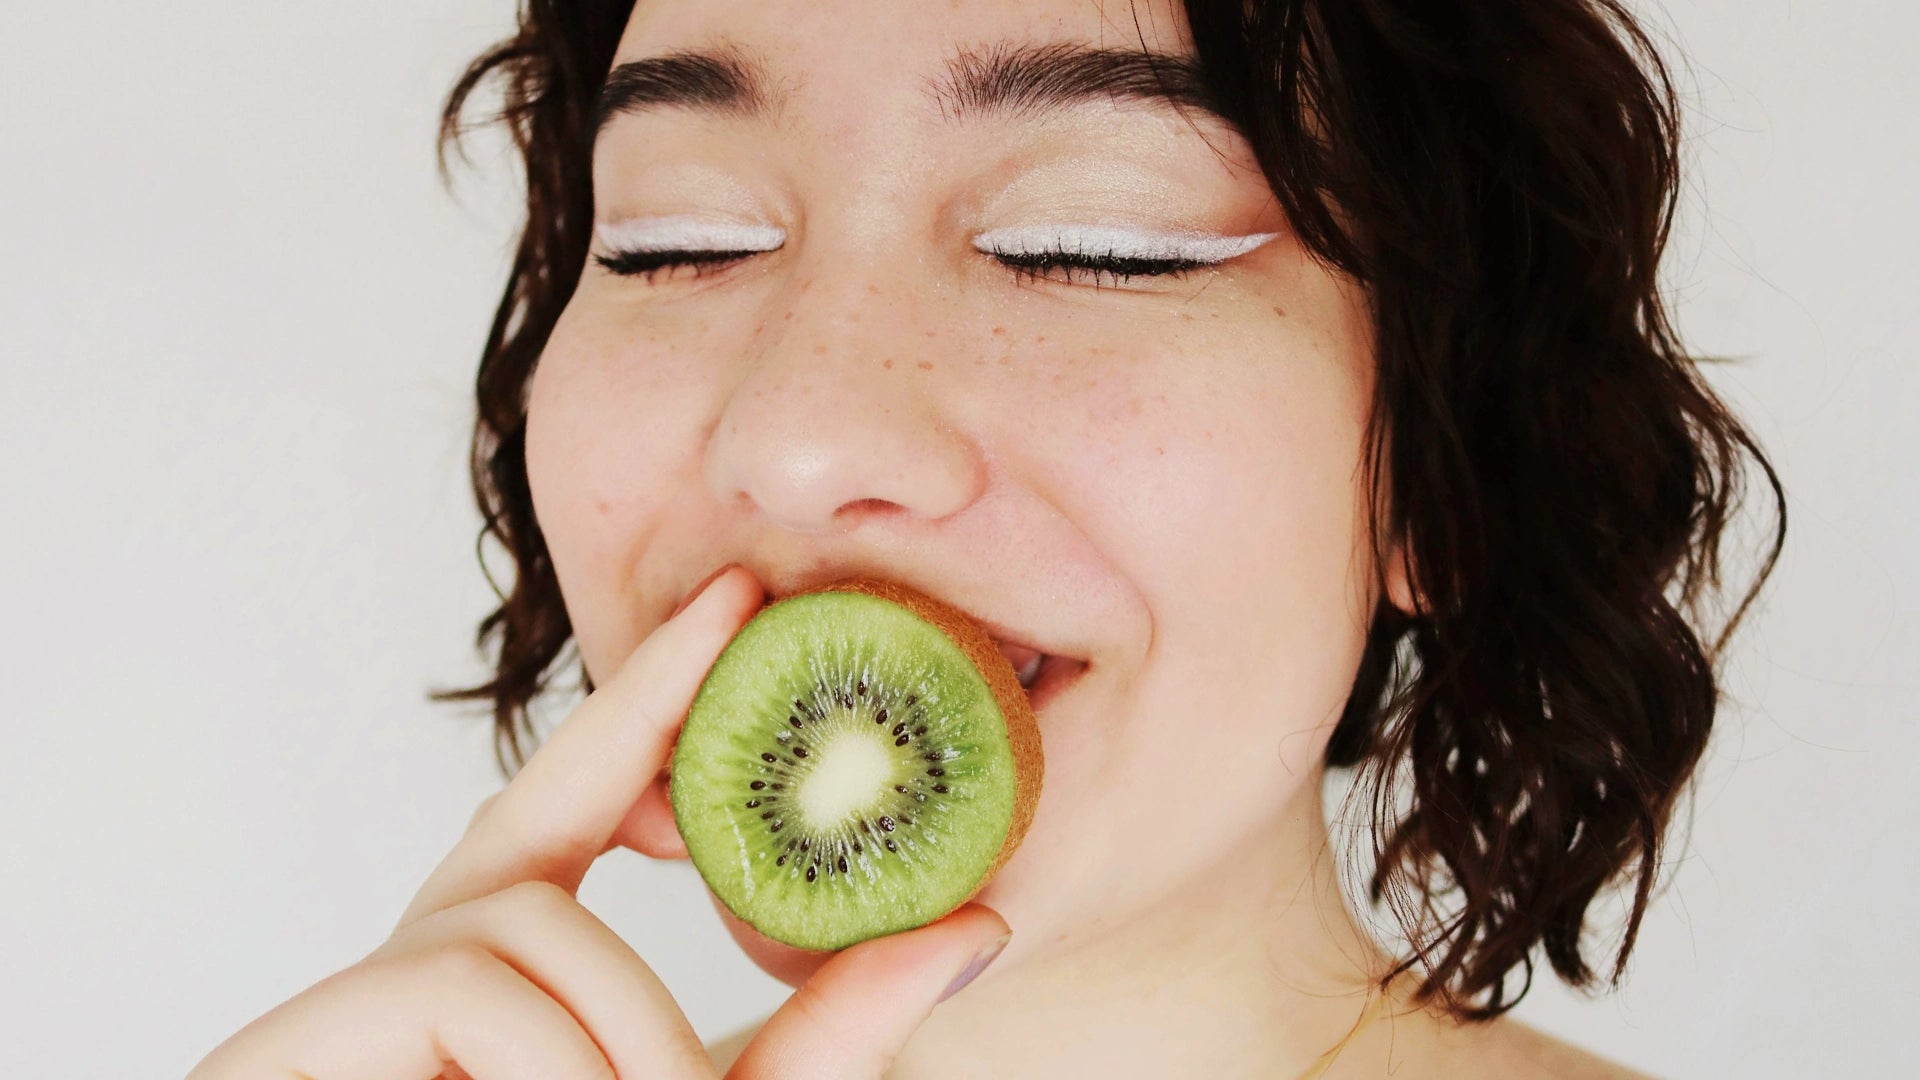 Girl holding a kiwi over her mouth